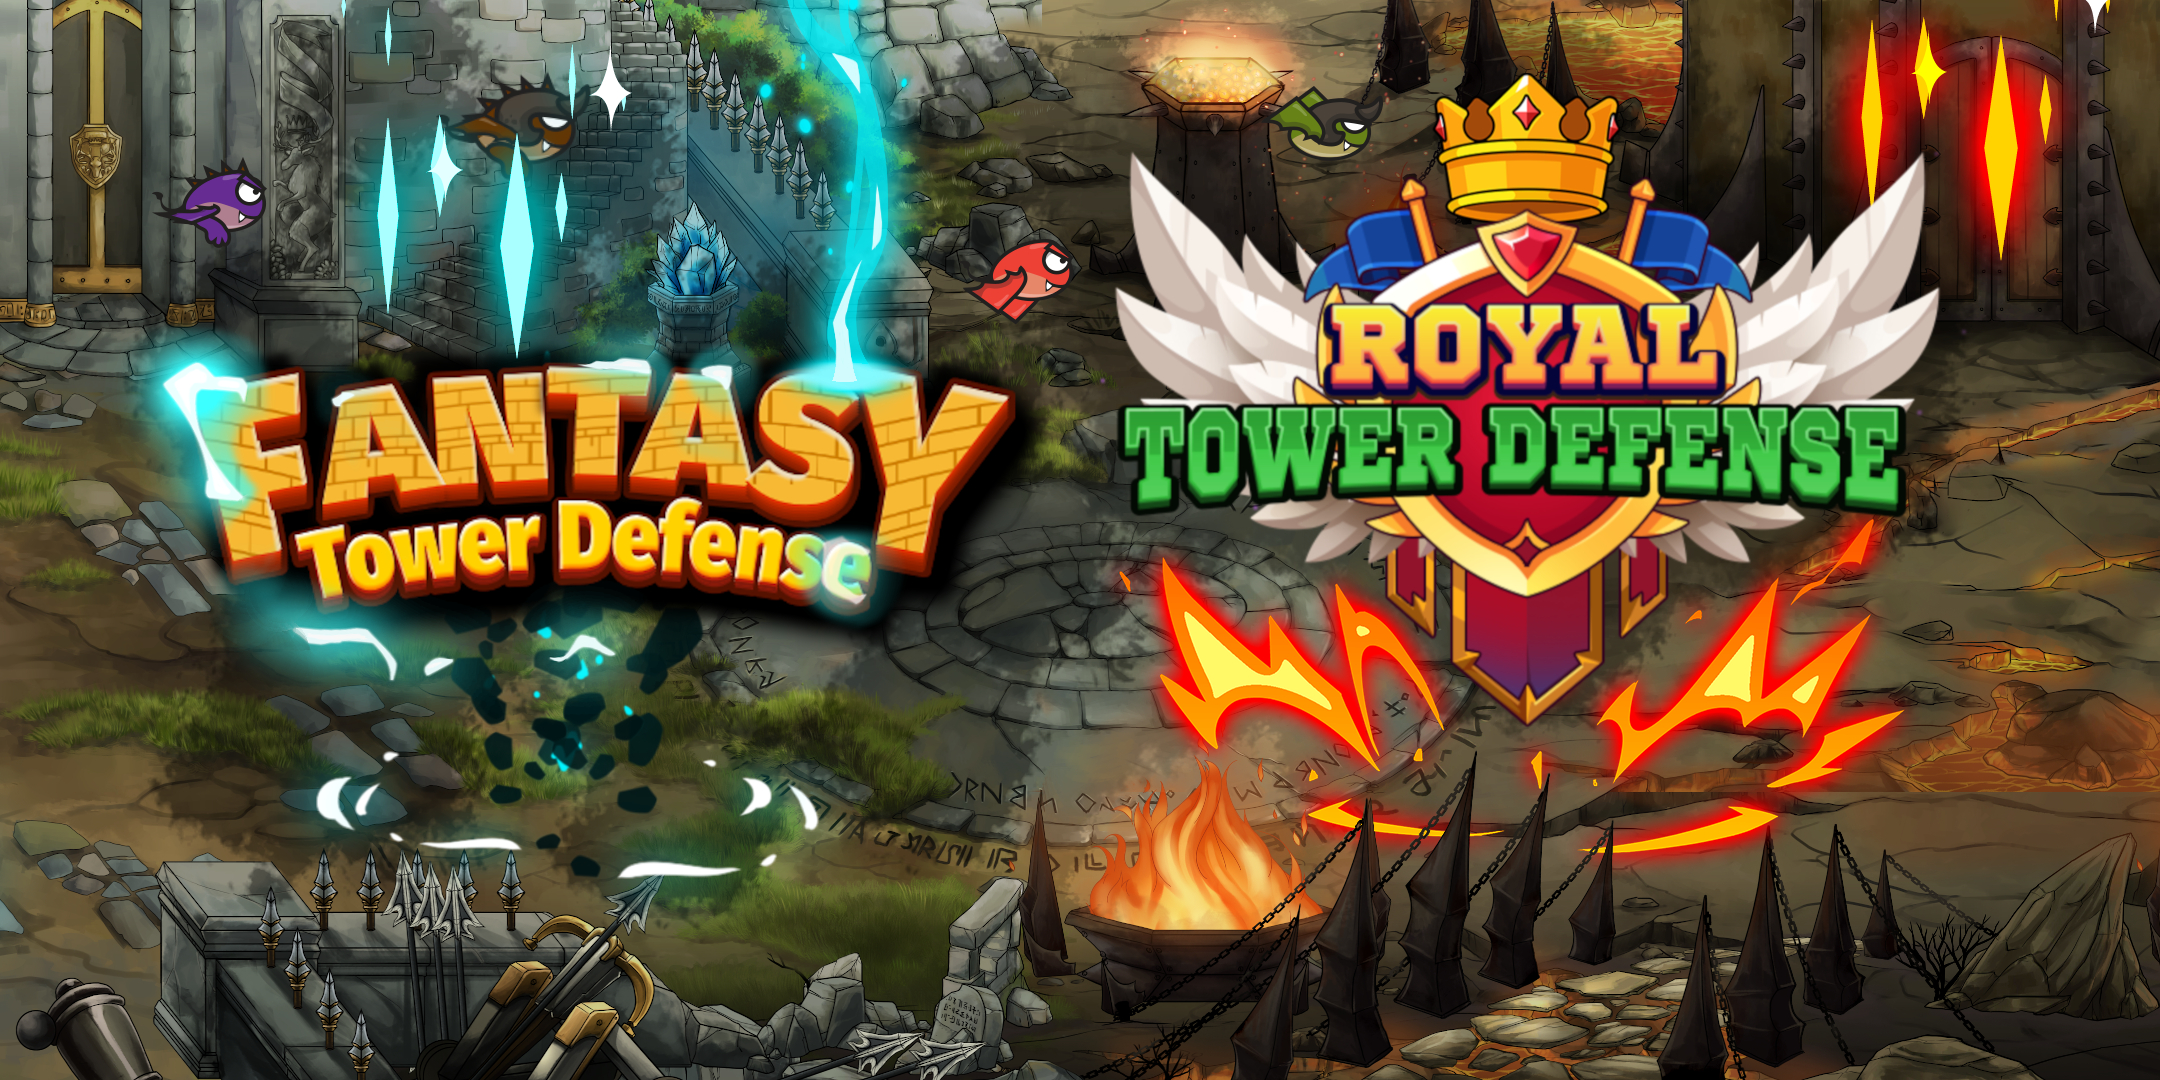 Pokemon Tower Defense: Reviews, Features, Pricing & Download